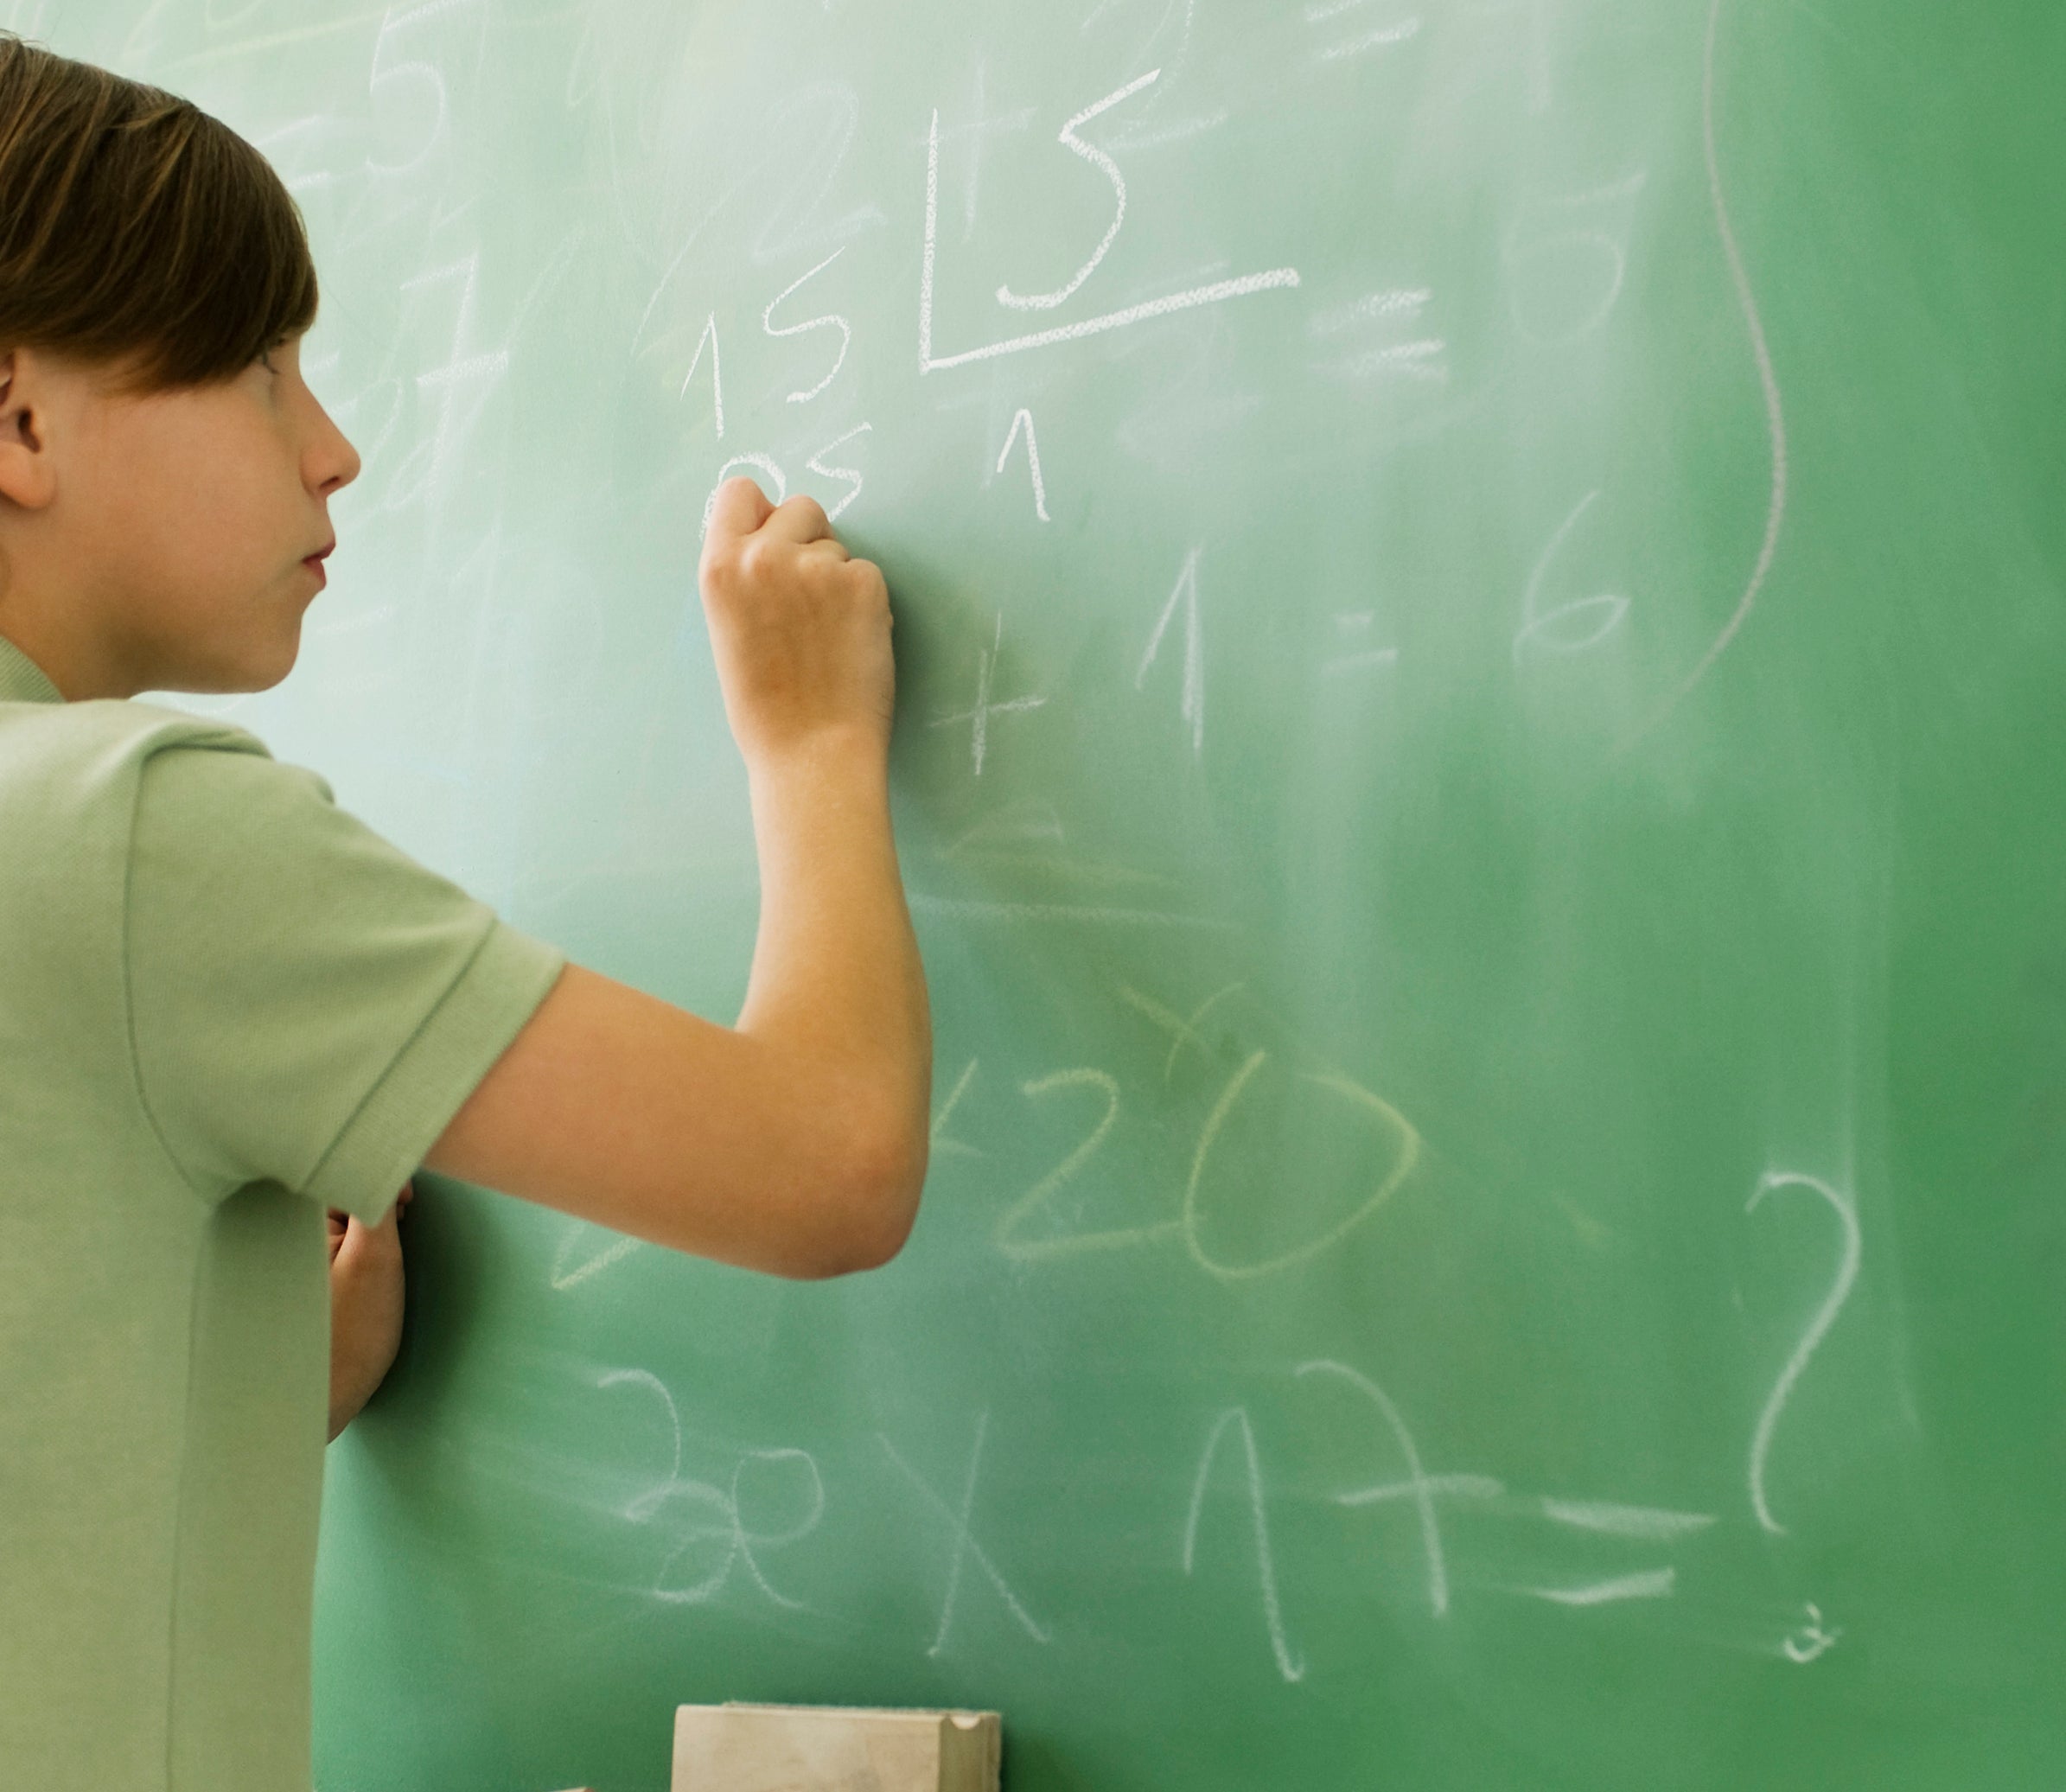 A student solving a math problem on the chalkboard